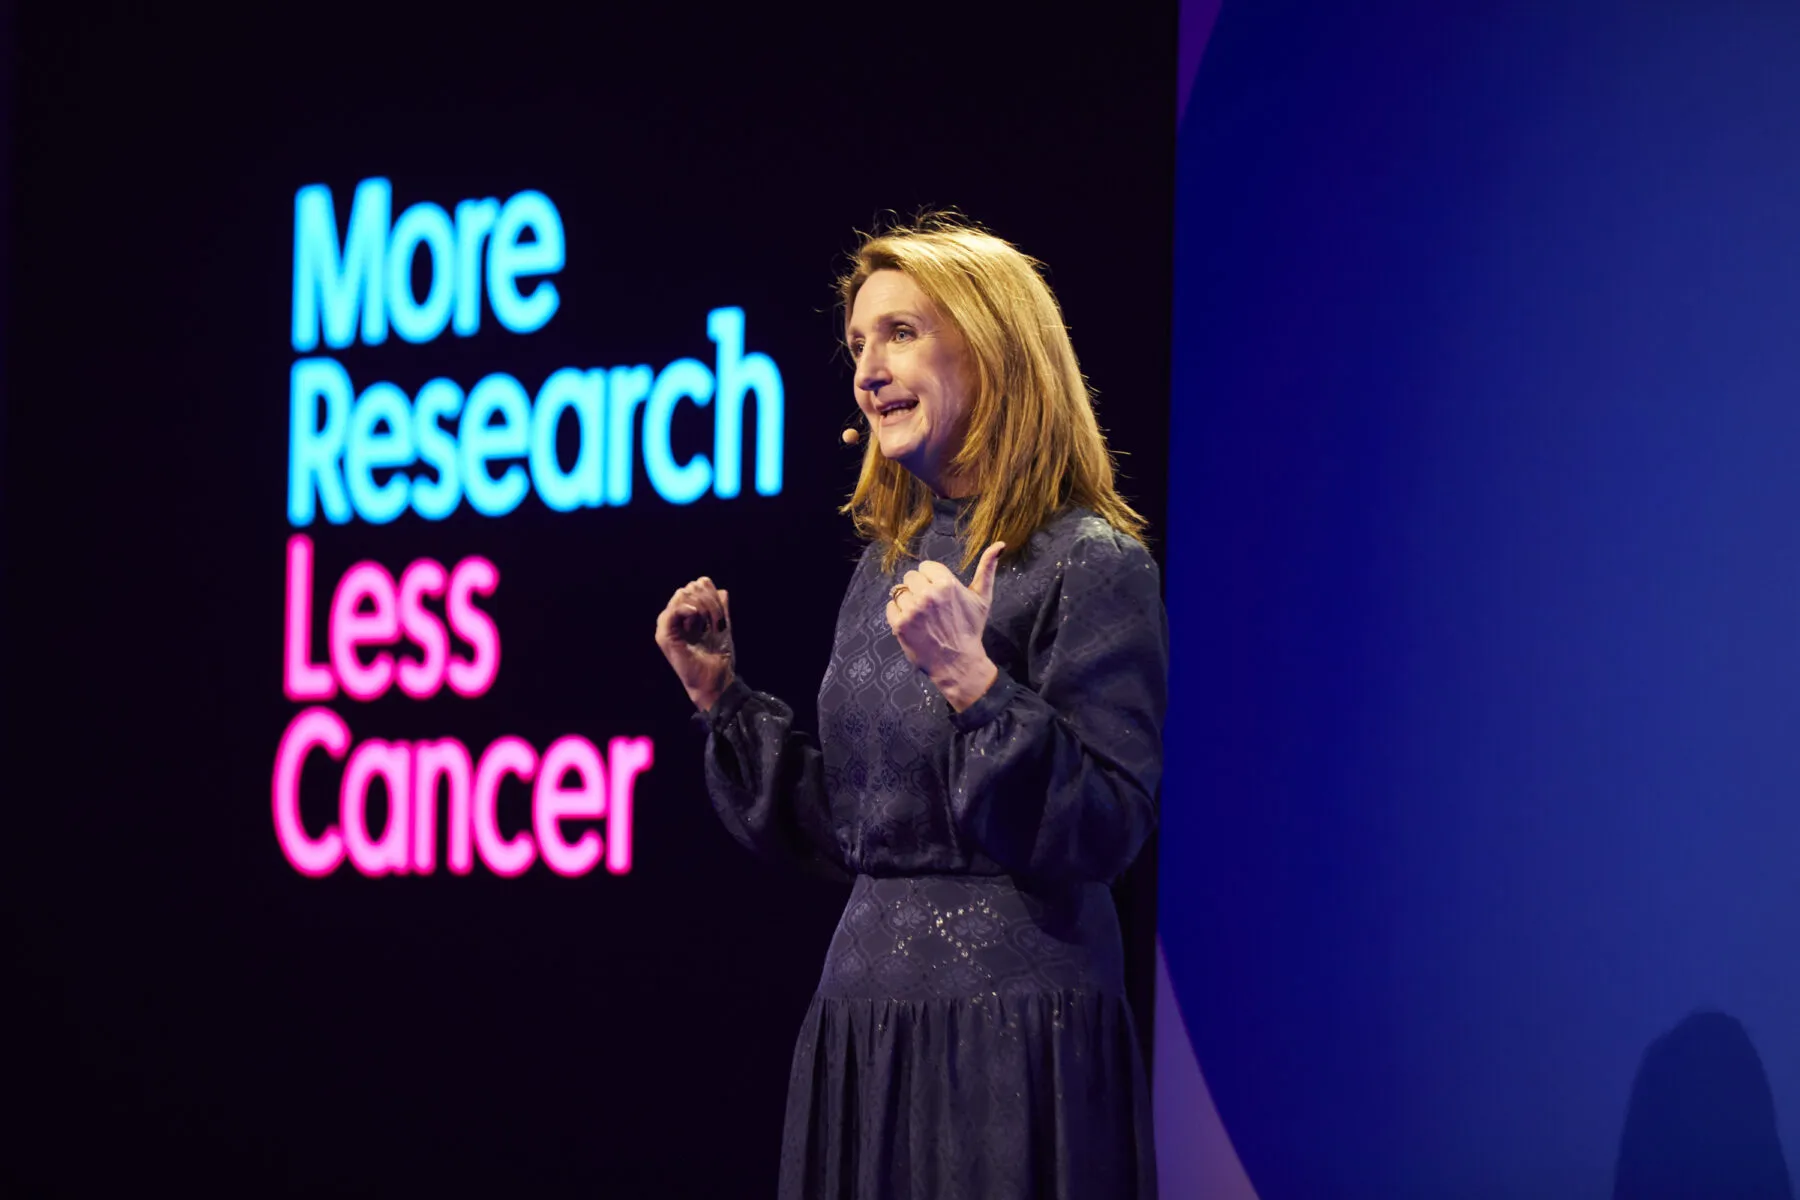 Victoria Derbyshire at the More Research Less Cancer Launch event